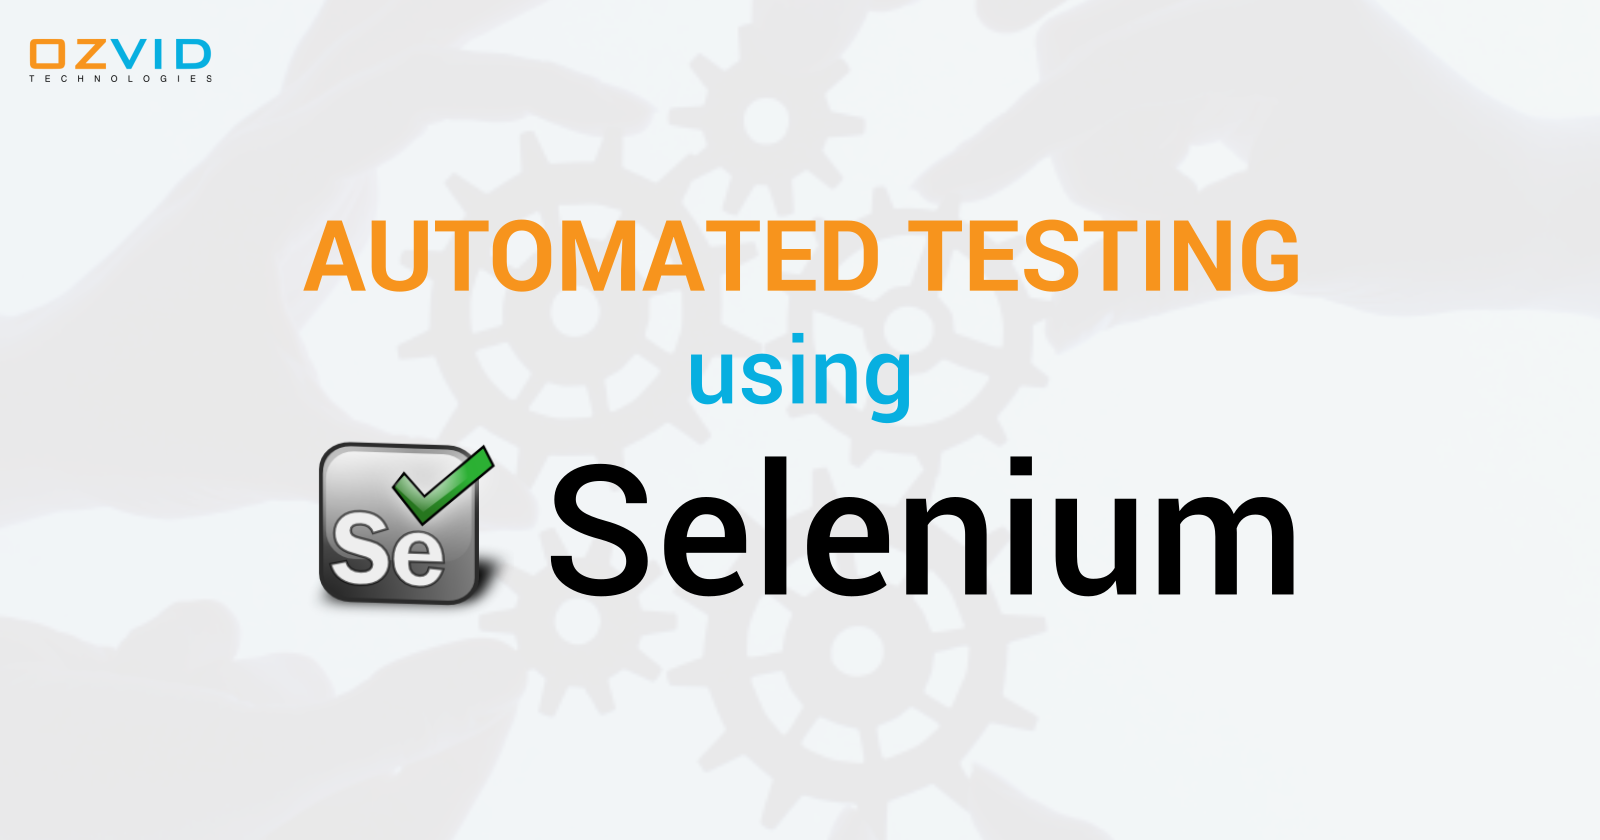 Using Selenium for Automated Testing